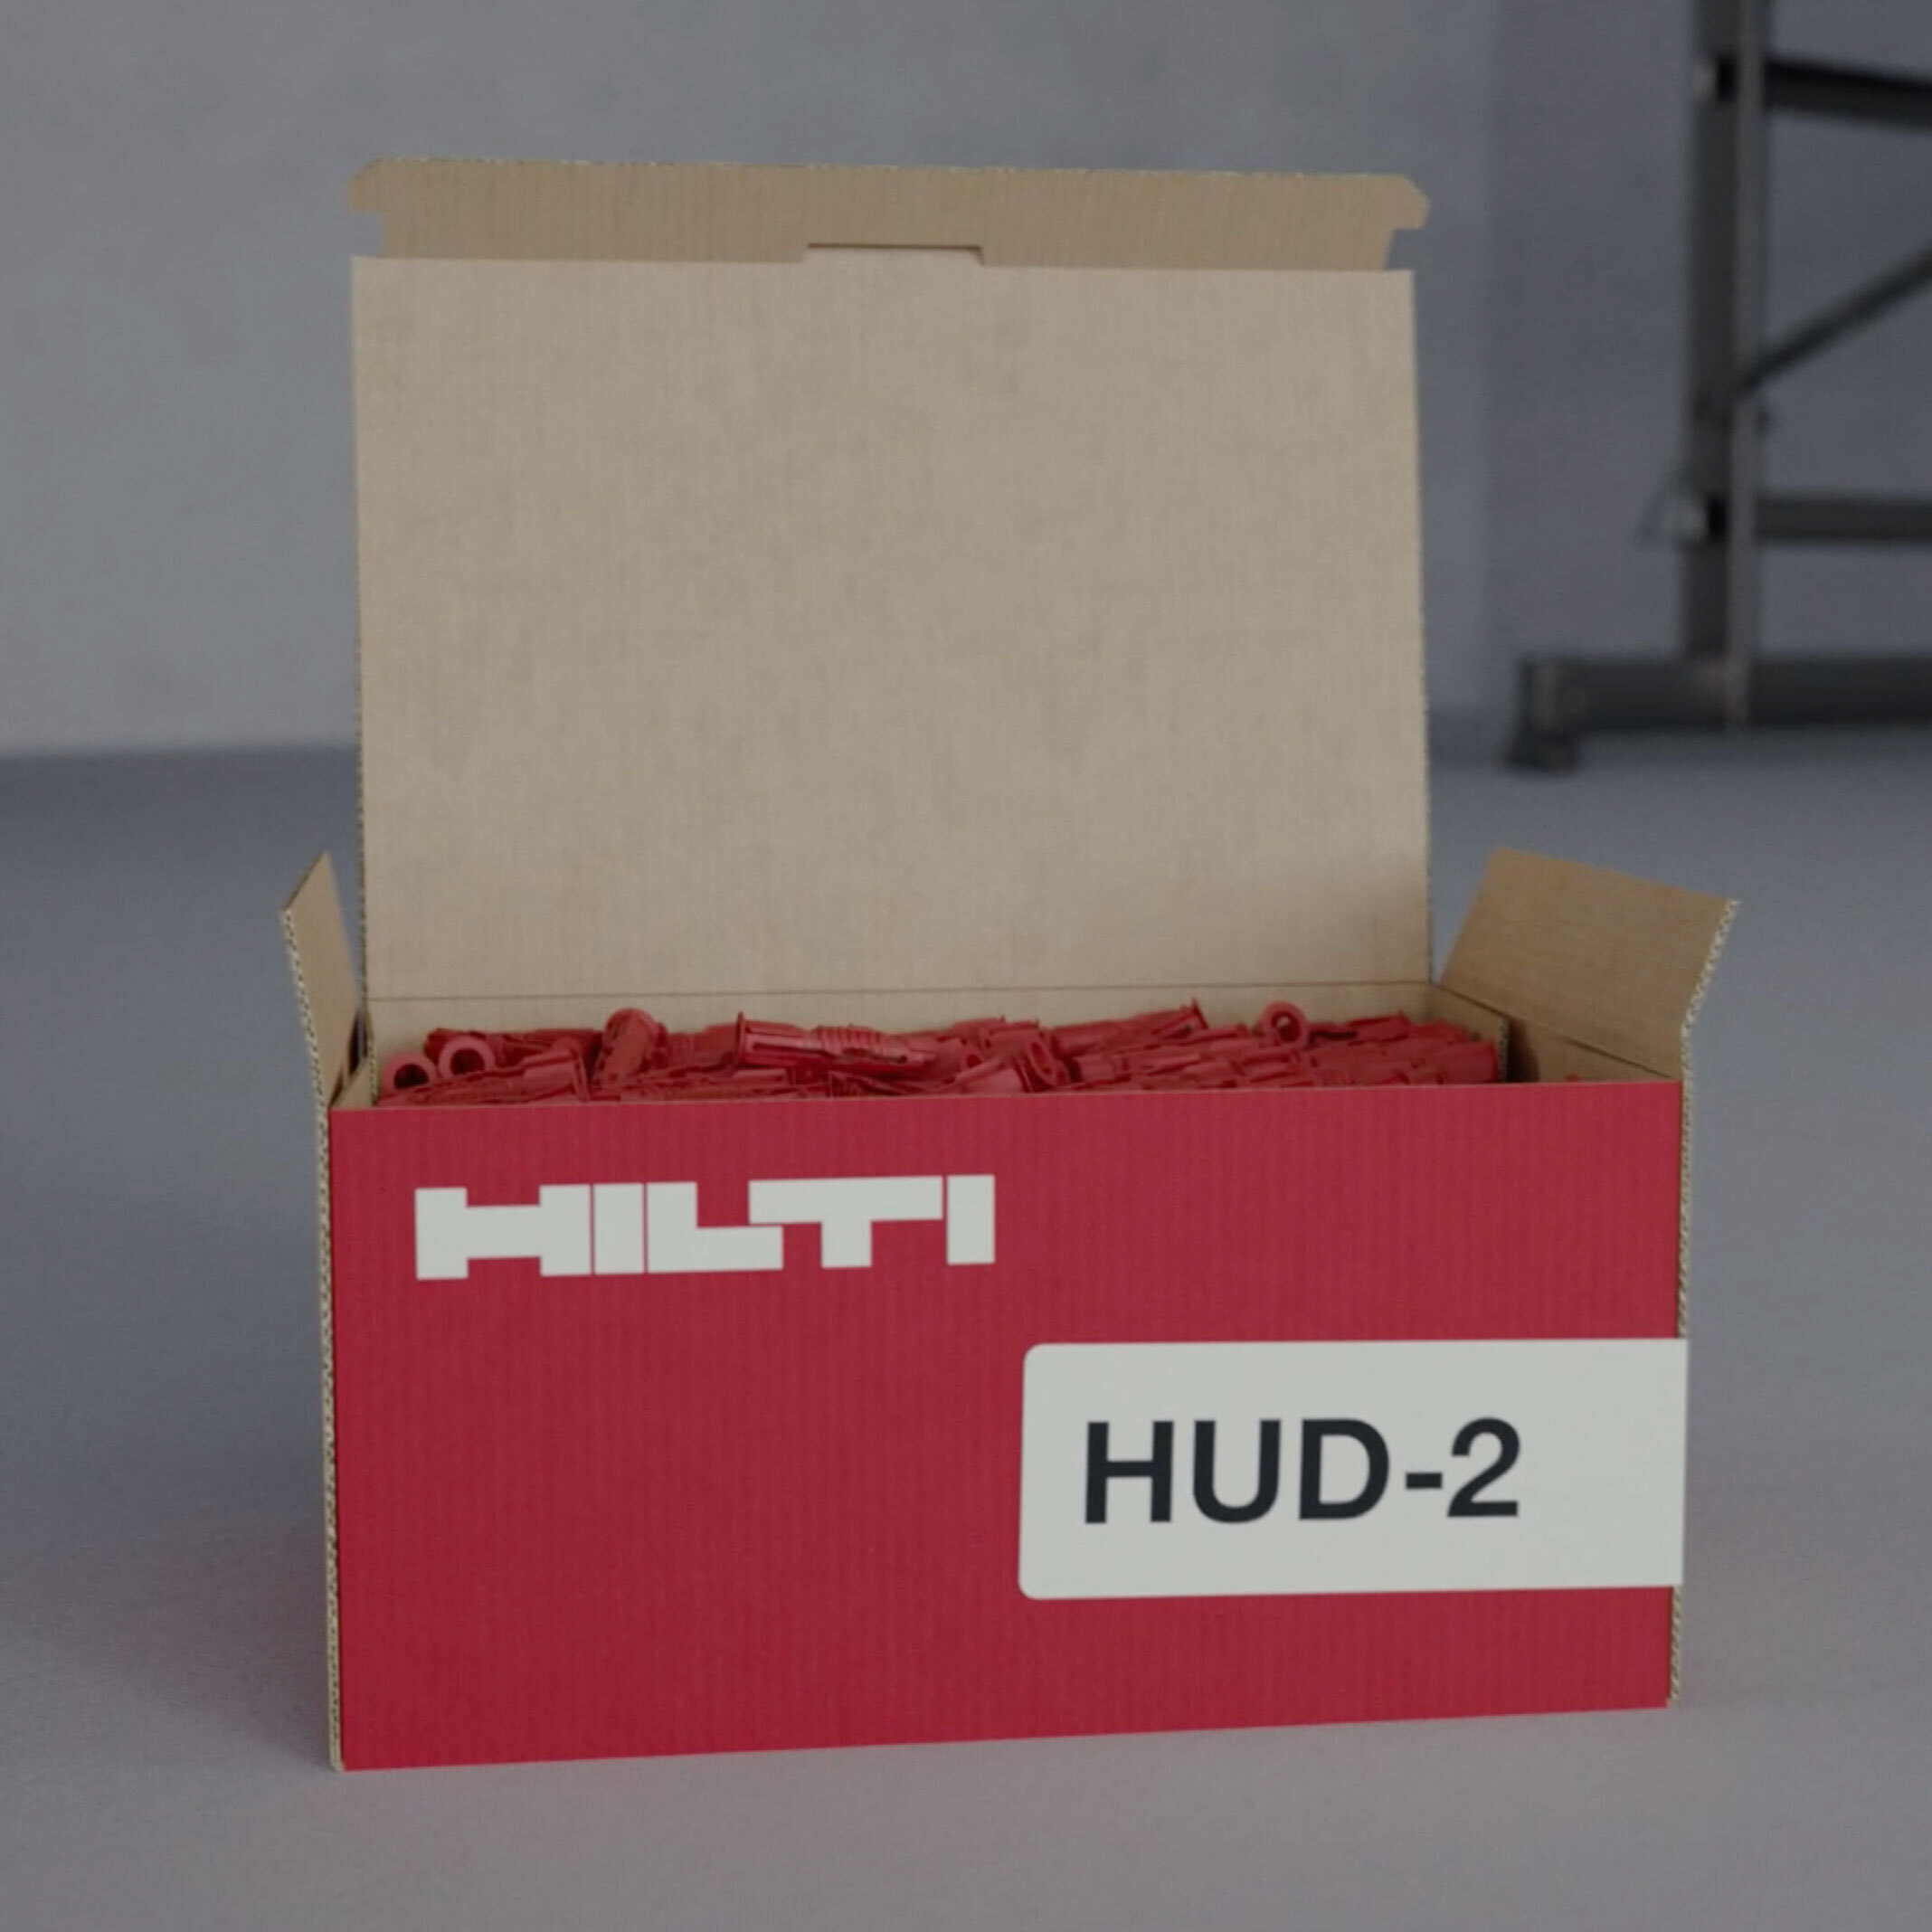 hilti red box filled with anchors